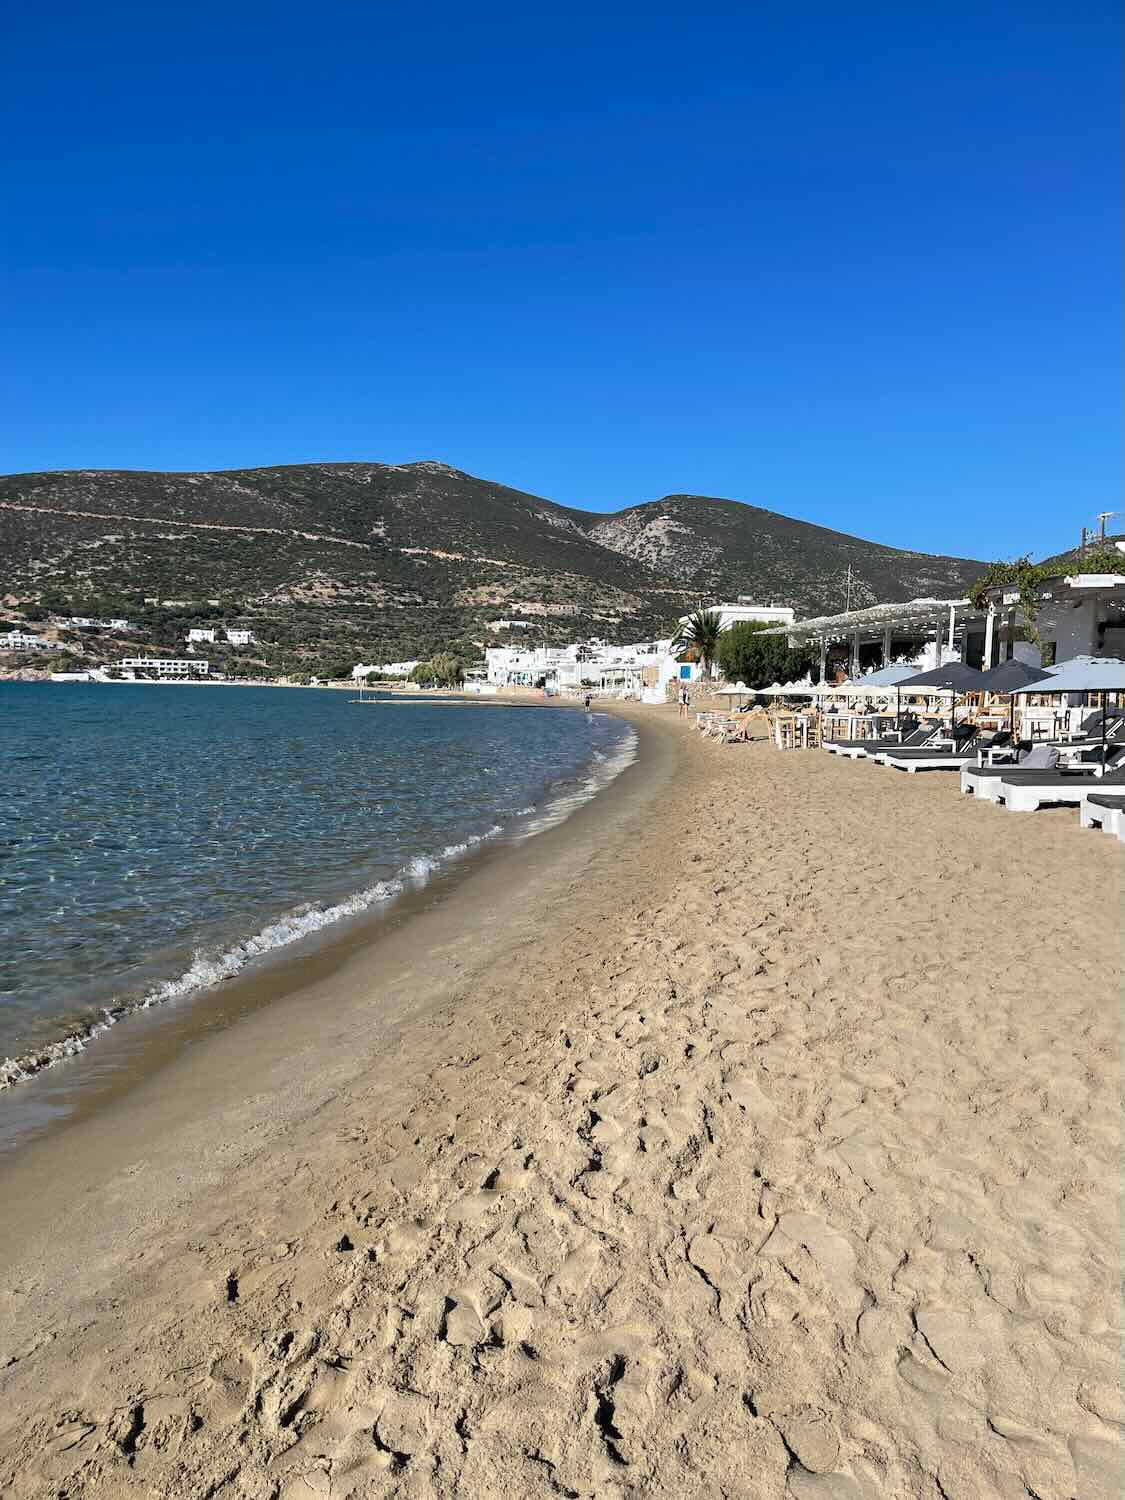 A tranquil beach scene with a long stretch of golden sand curving along the calm blue waters of Sifnos,